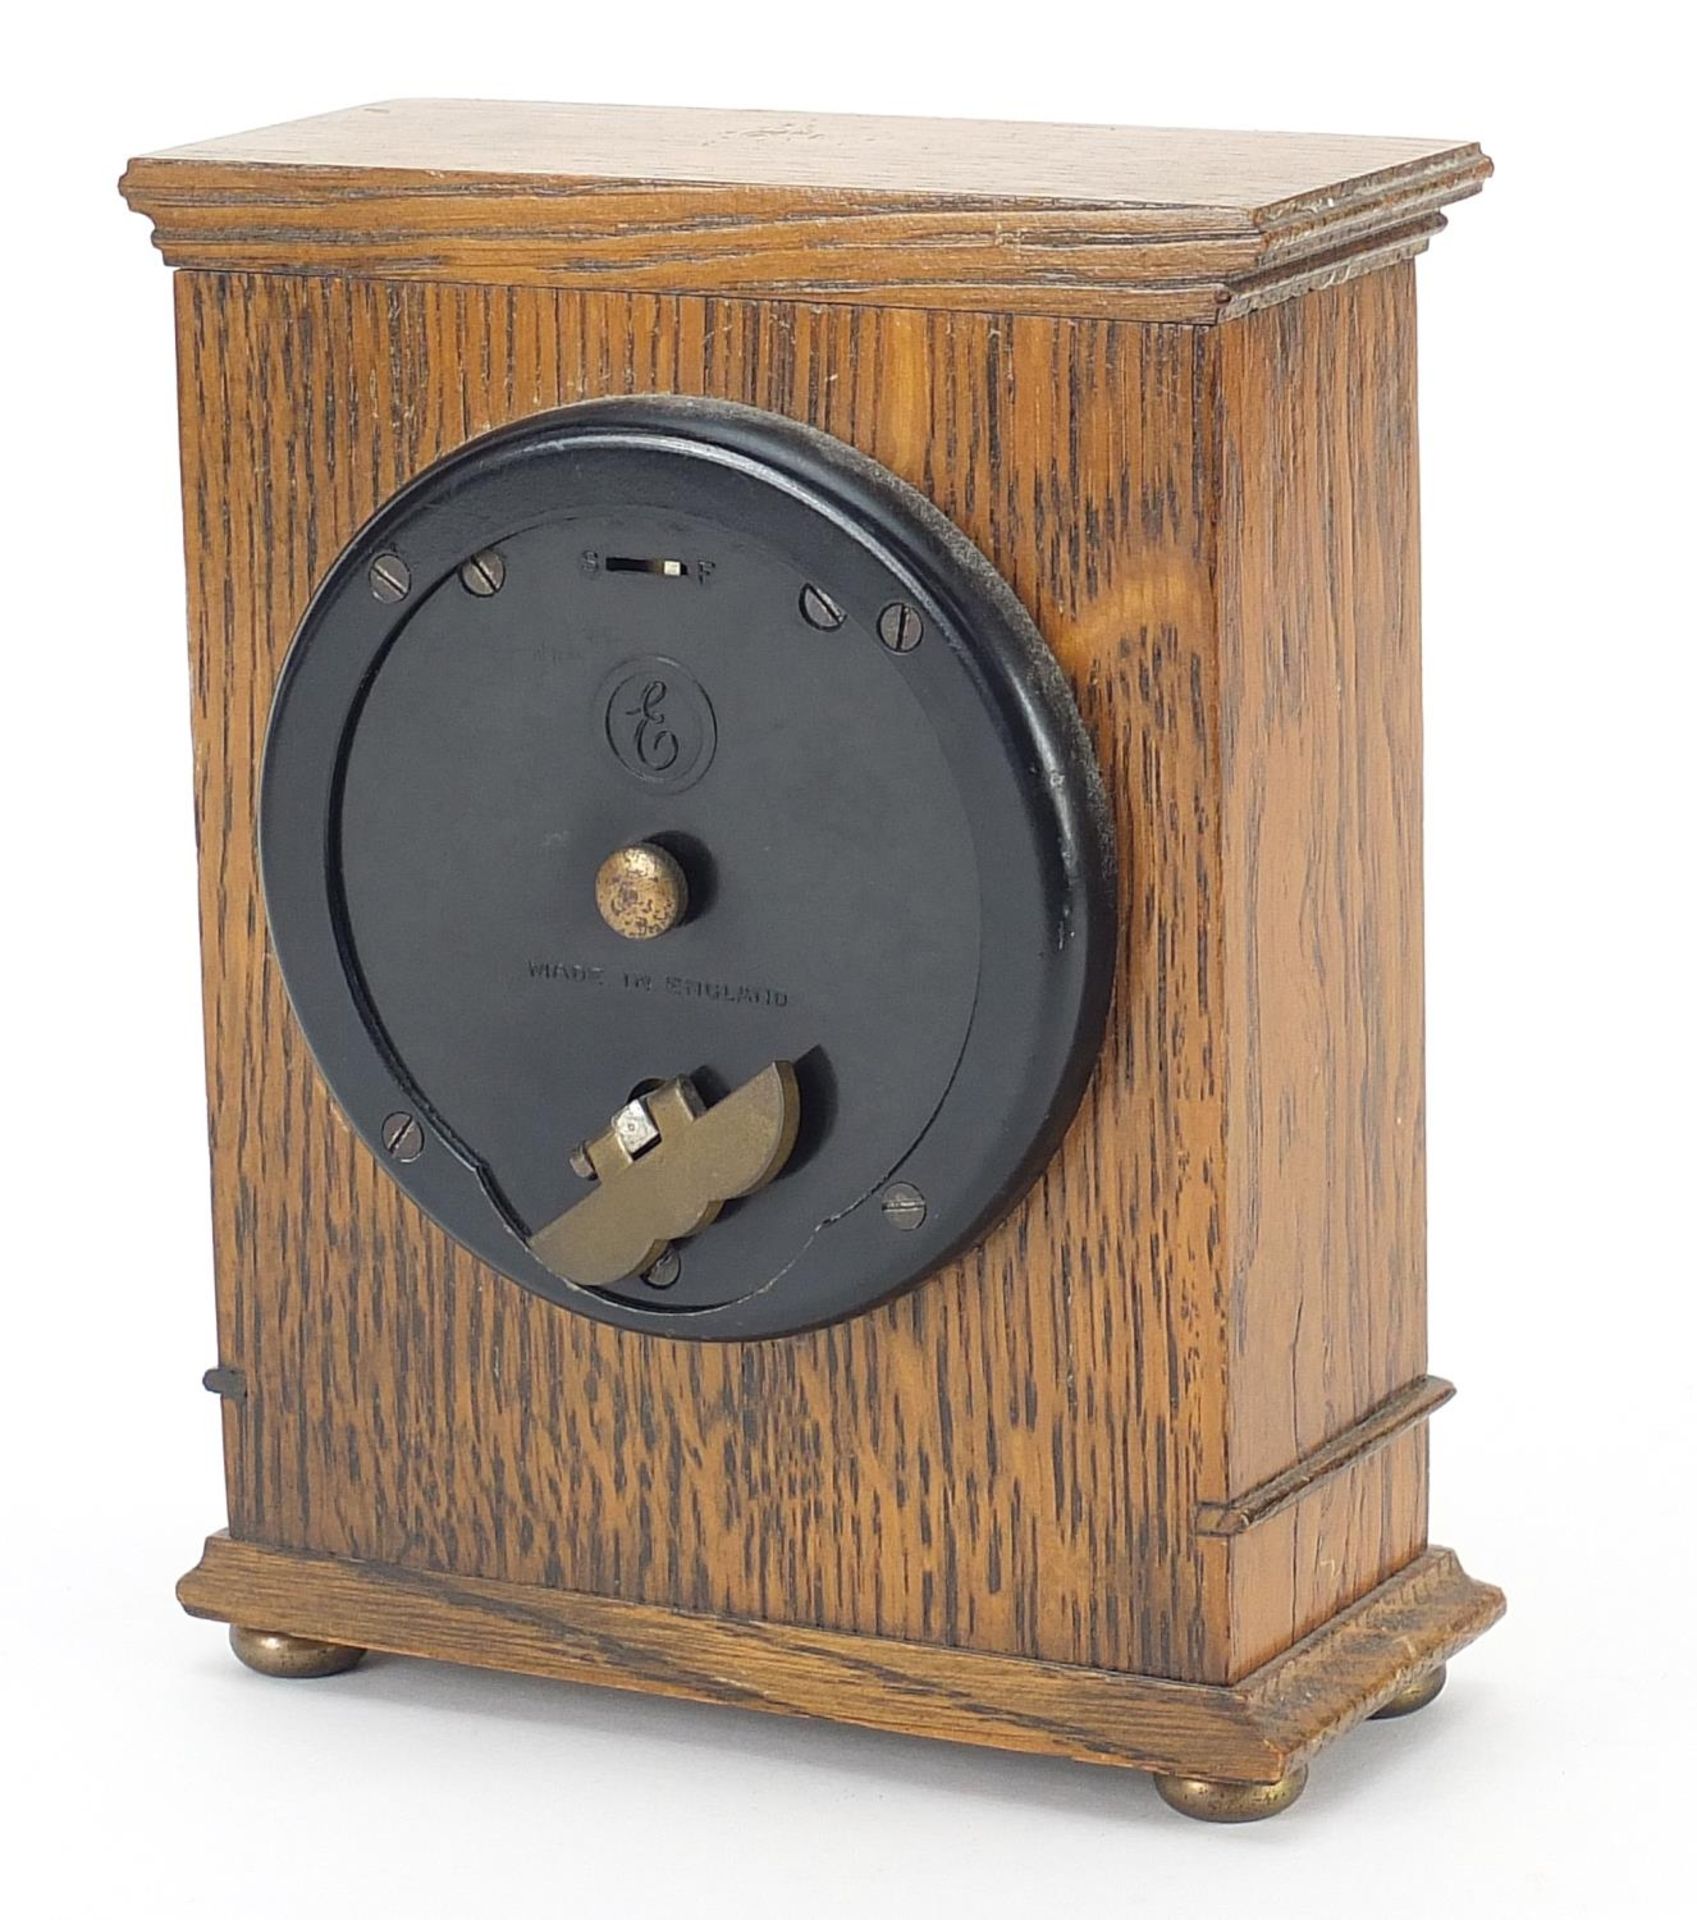 Carved walnut Elliott mantle clock with brass dial, 16.5cm high - Image 2 of 2